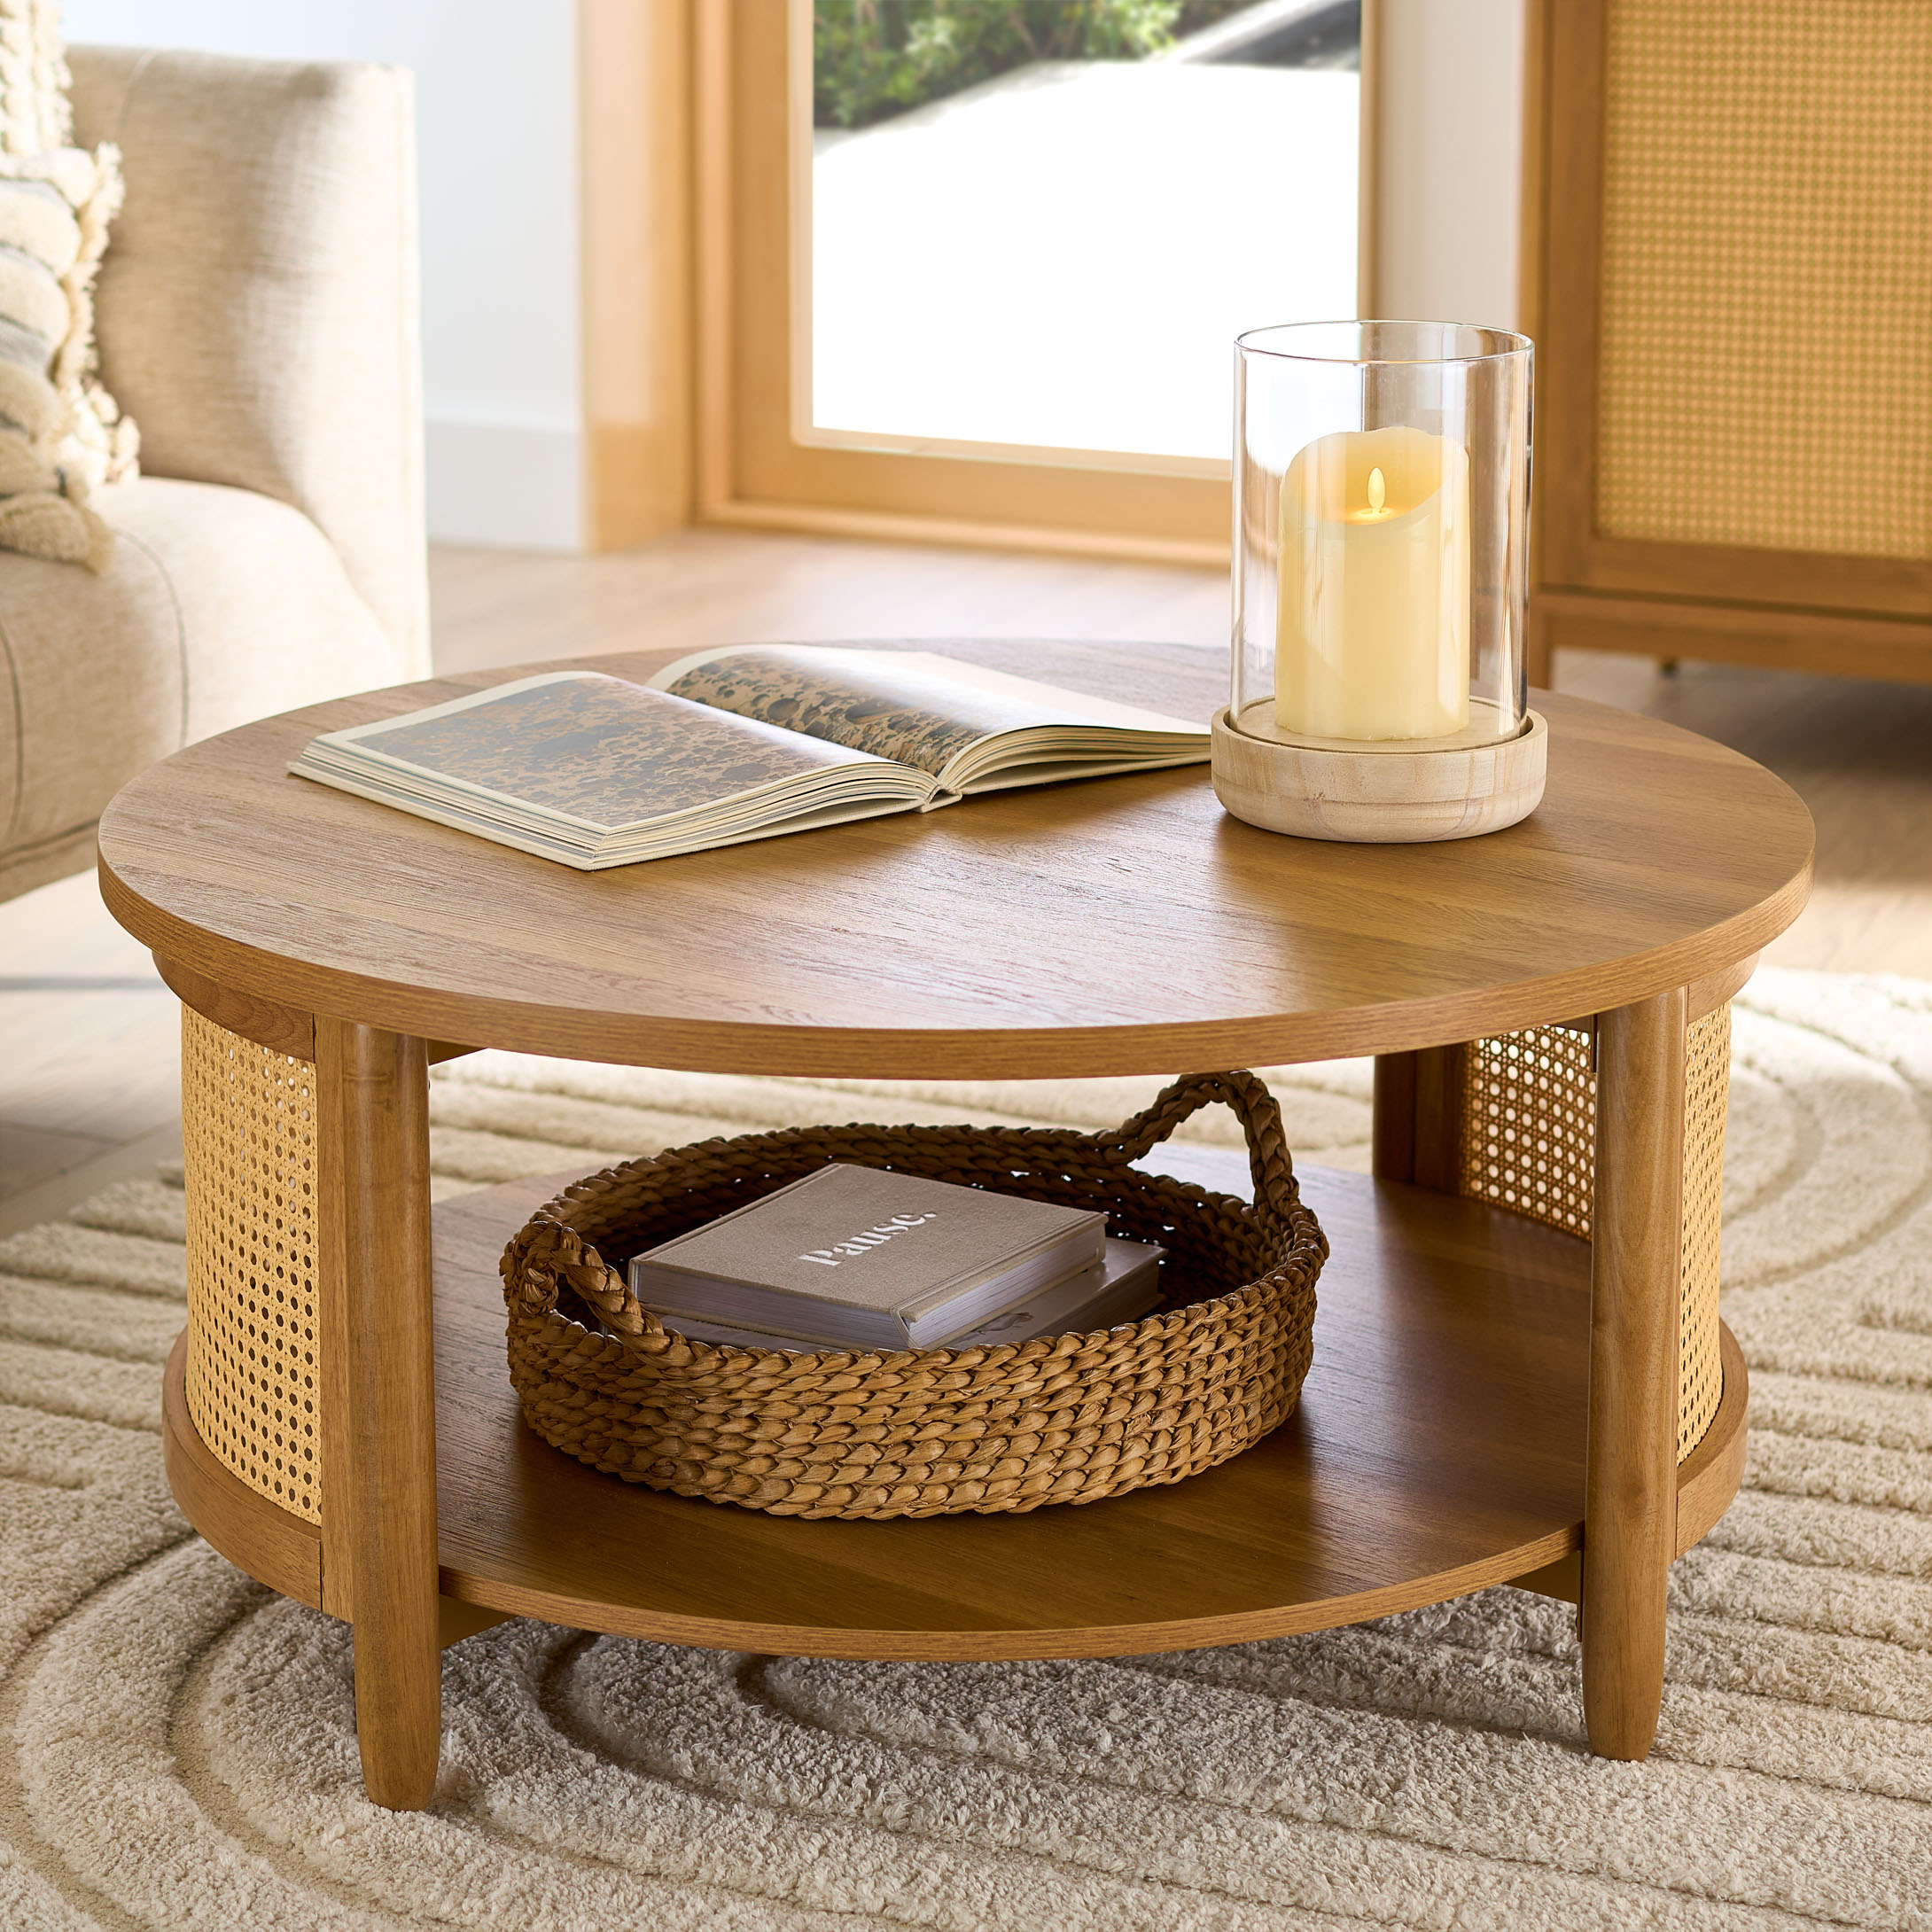 Better Homes & Gardens Springwood Caning Coffee Table, Light Honey Finish - image 4 of 9